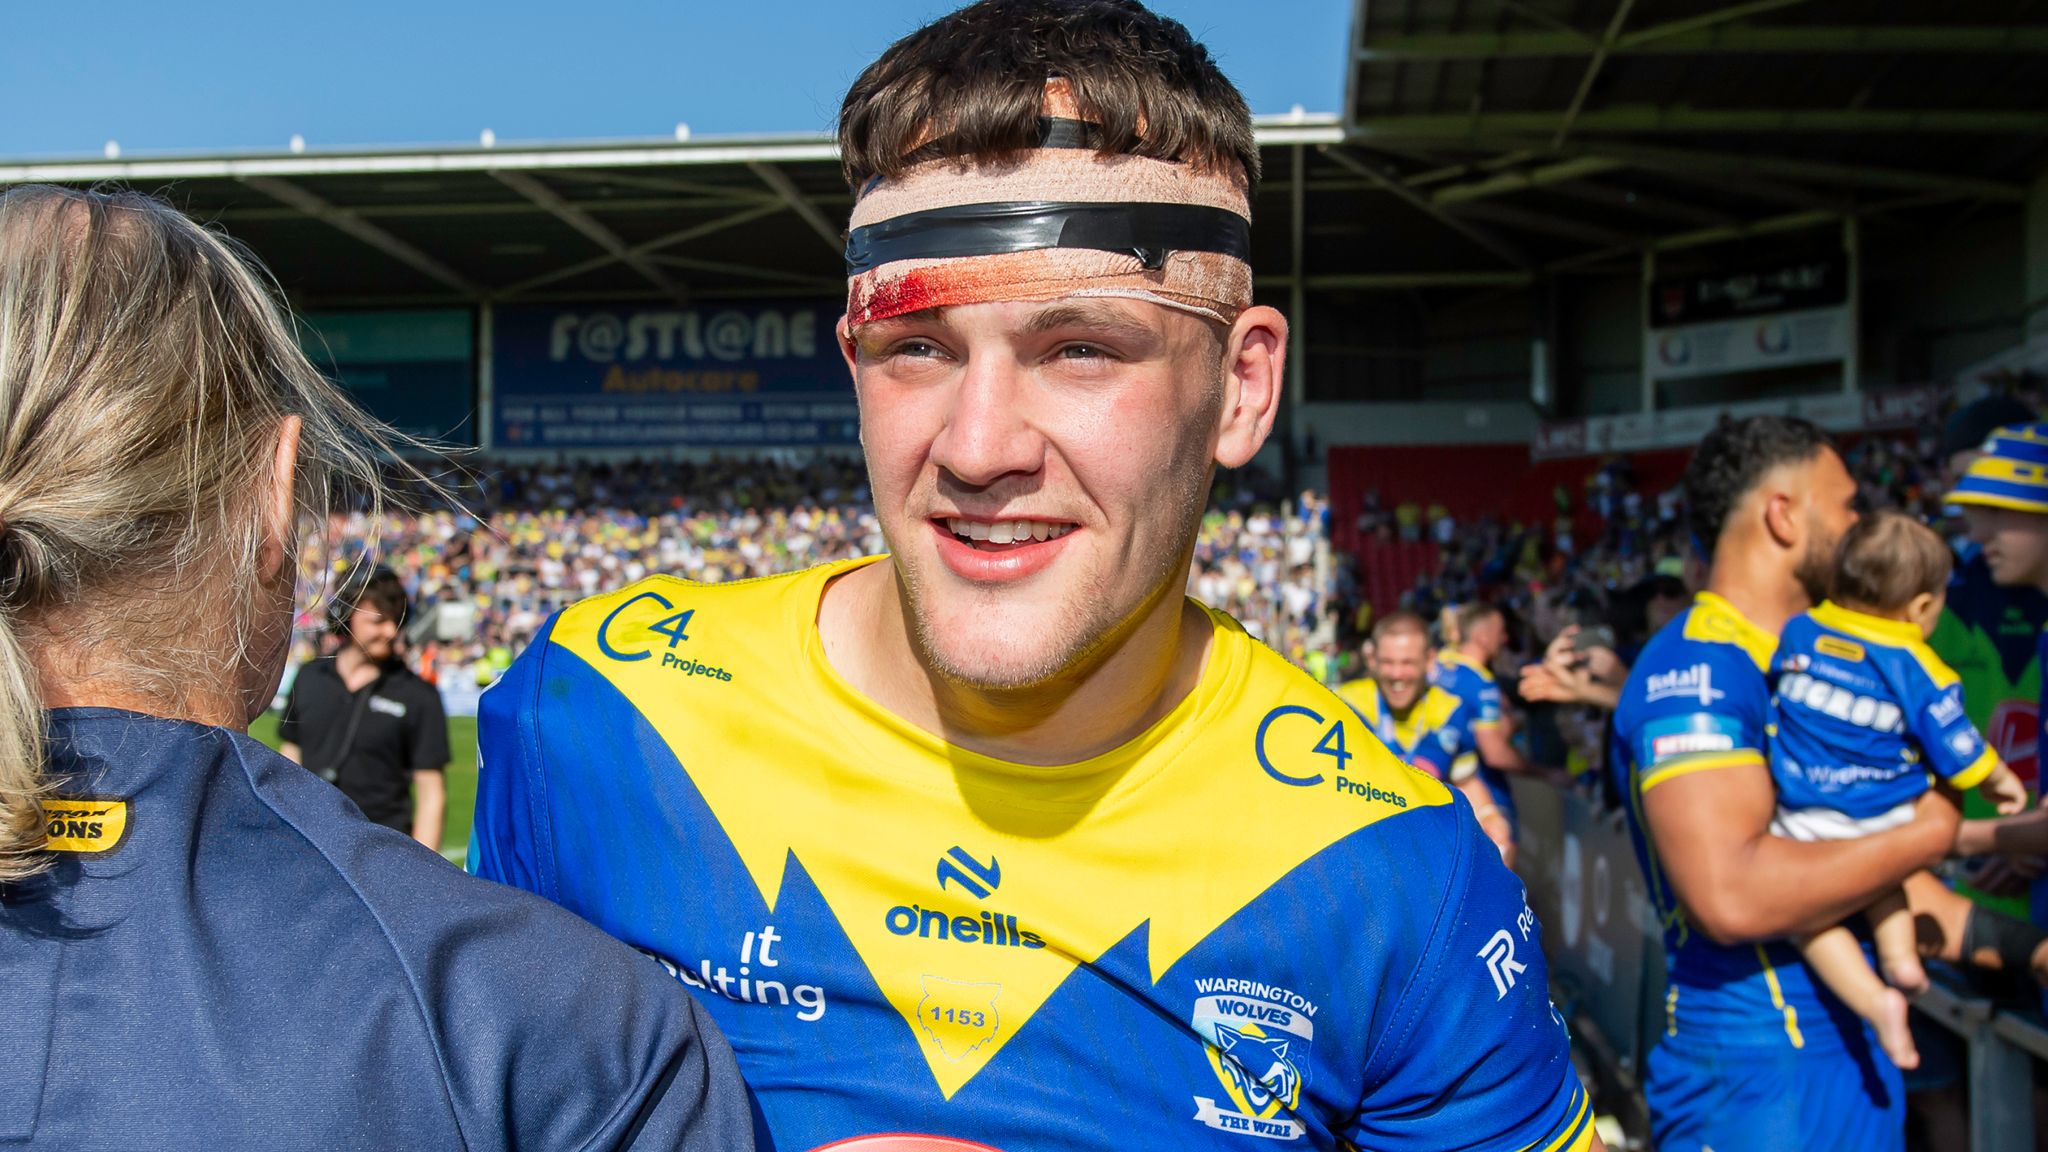 Challenge Cup final: Warrington Wolves' rising star Josh Thewlis spurred on  by Wembley glory aim | Rugby League News | Sky Sports